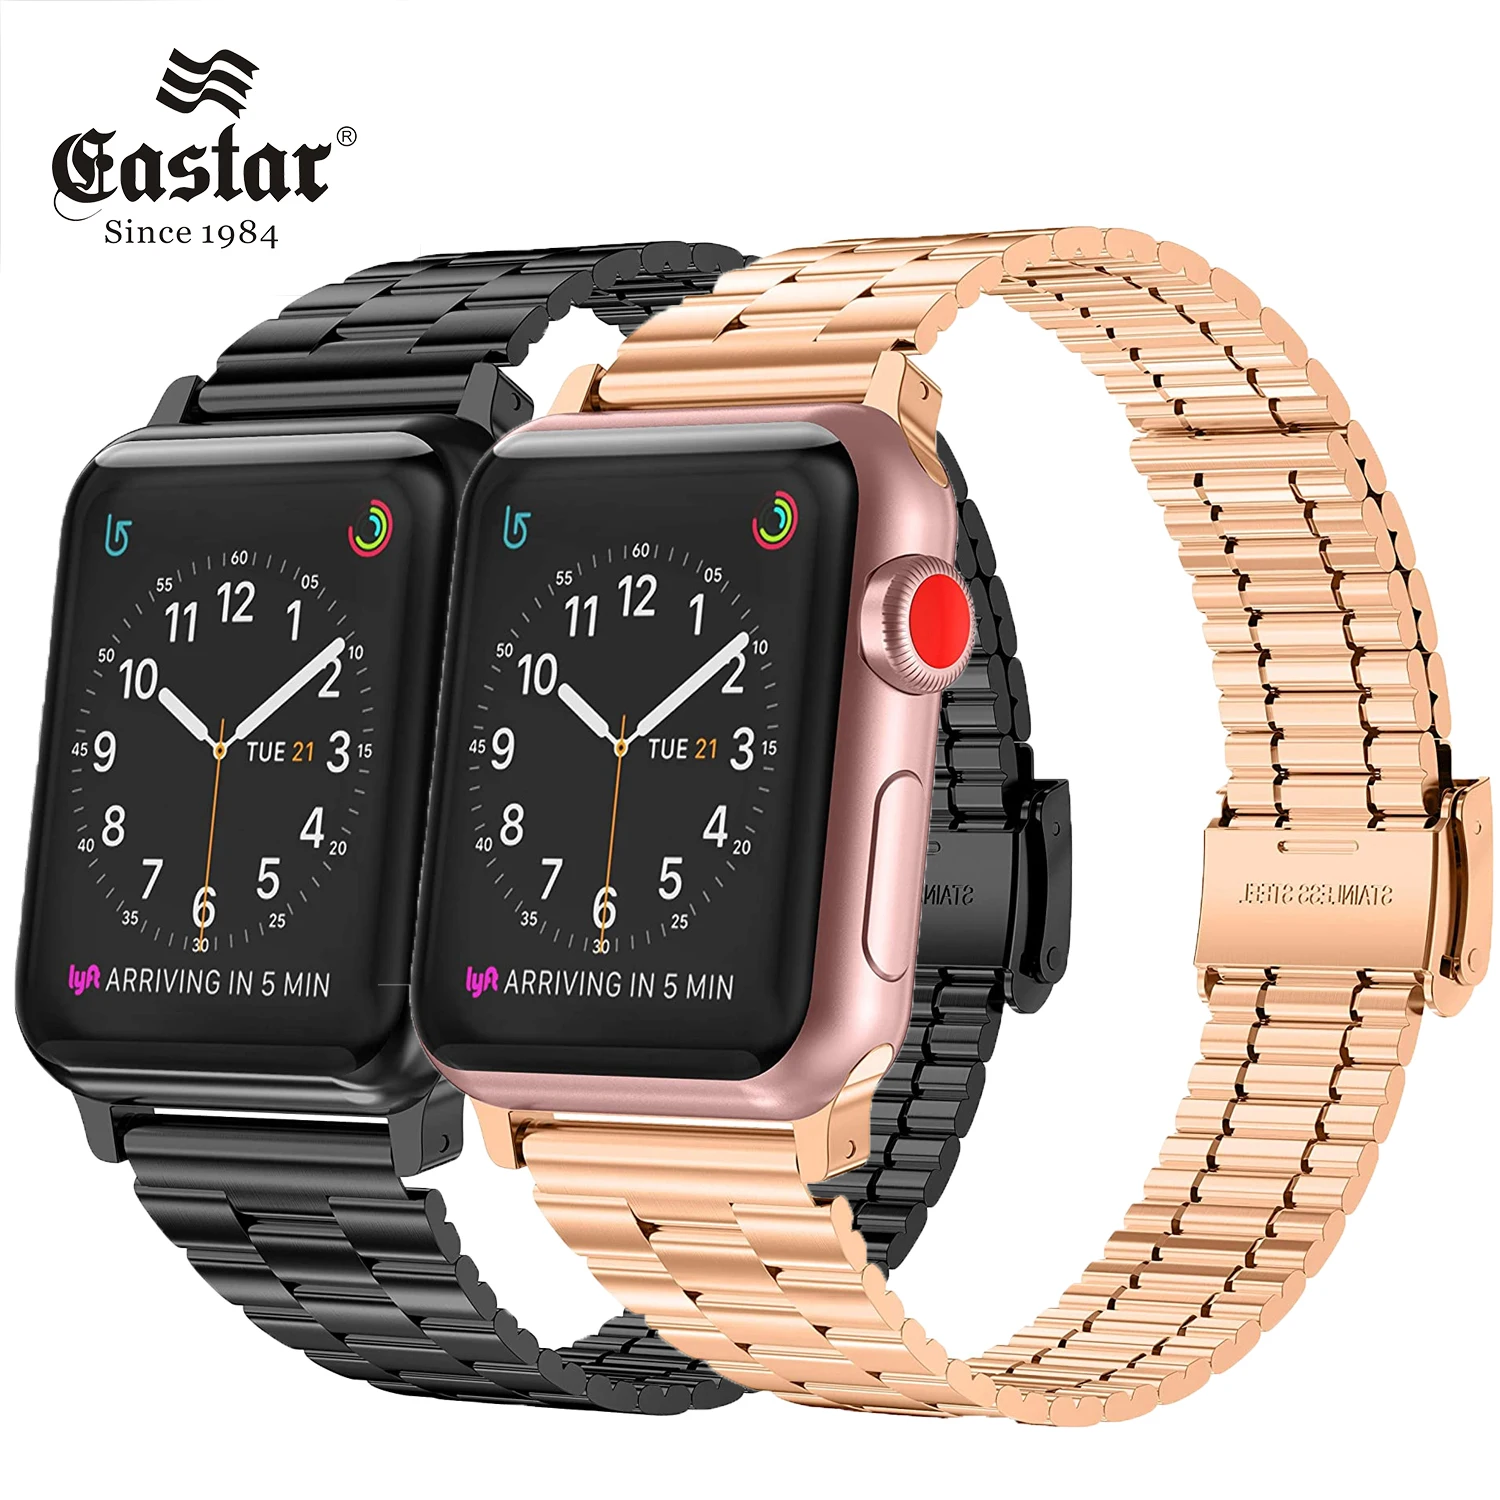 For Apple Watch Series 7 6 5 4 3 2 Band Strap 40mm 44mm 42mm Black Stainless Steel Bracelet Strap Adapter for iWatch Band 38mm